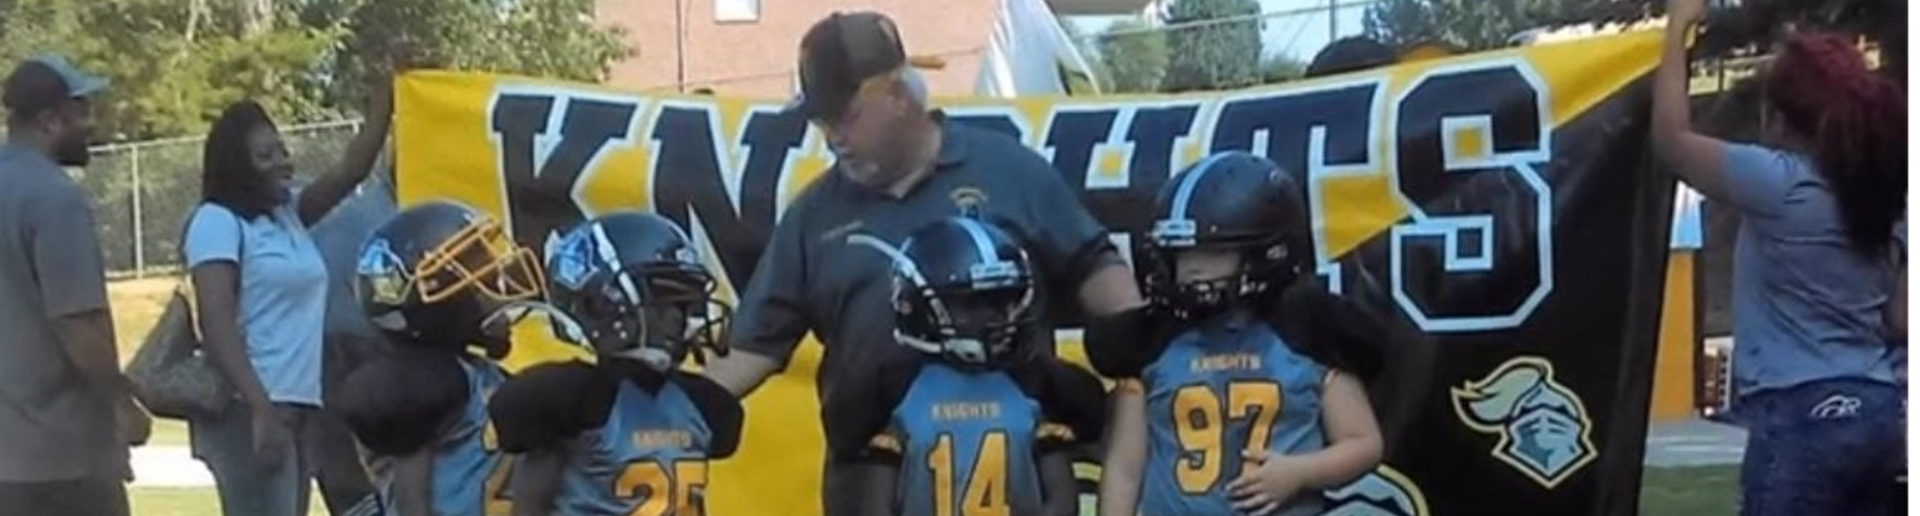 The Latest National Youth Football News, Camps, Leagues and More